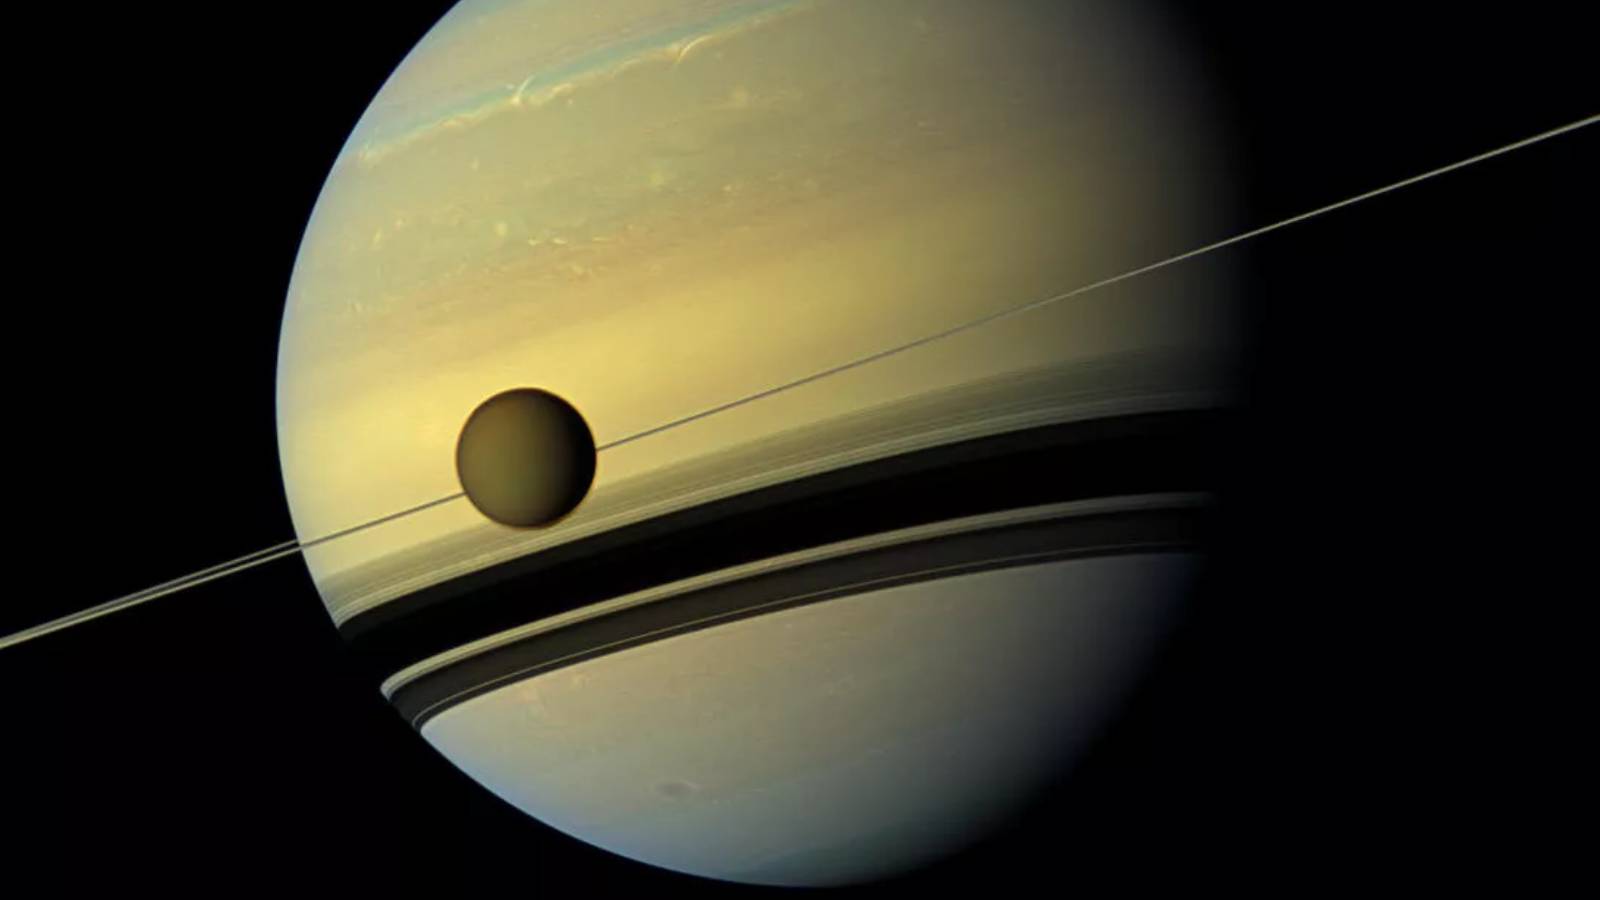 The living planet Saturn